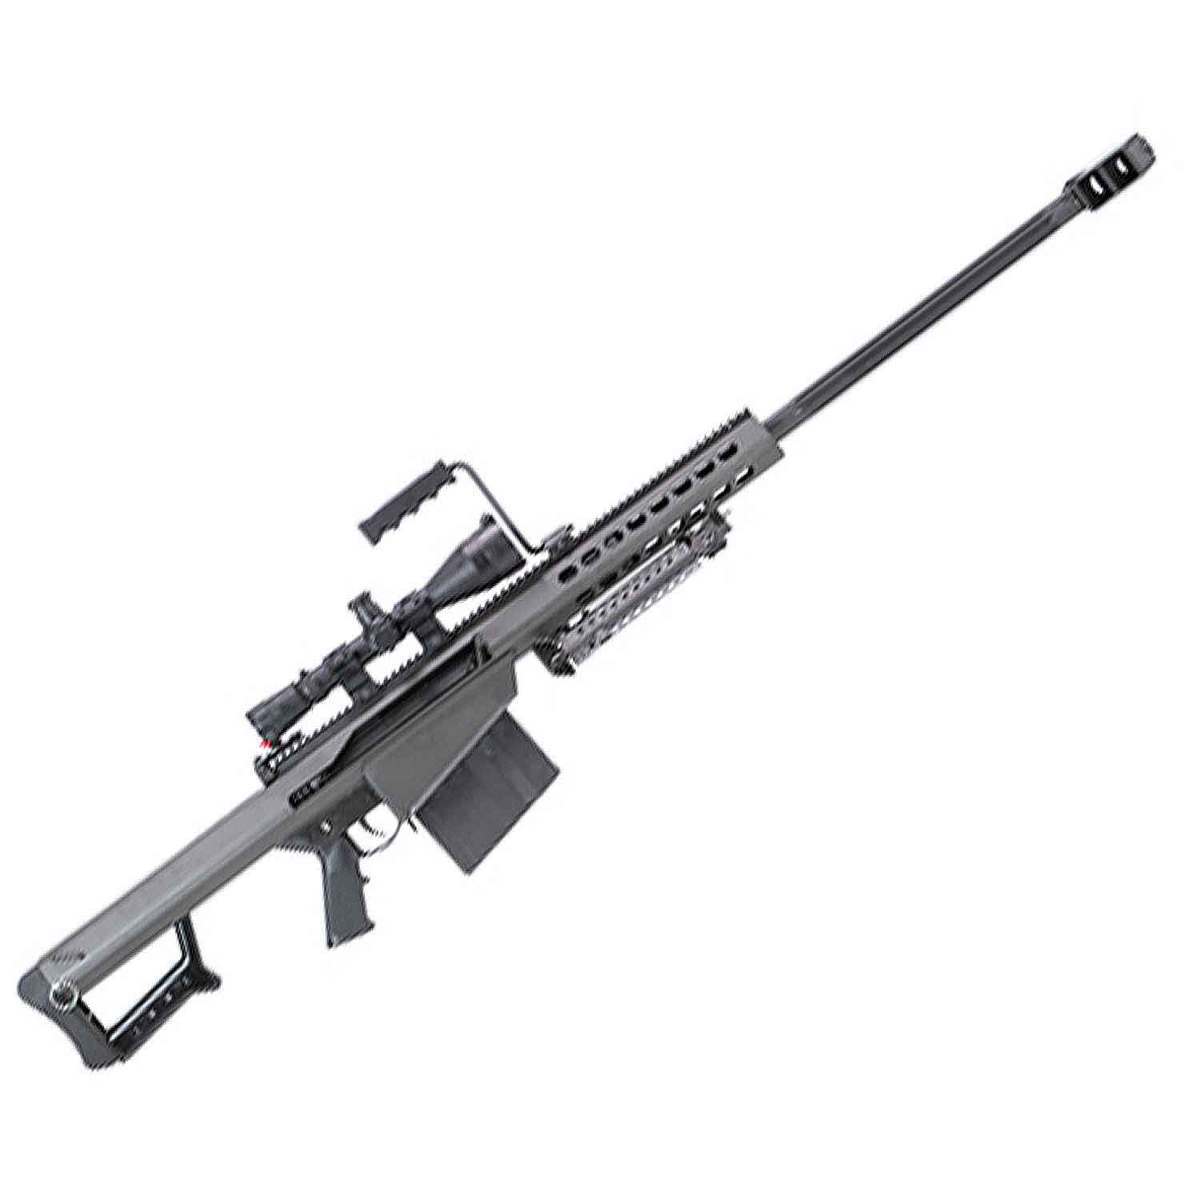 Military Journal - Barrett 50 Bmg Price - Do you really want a ...